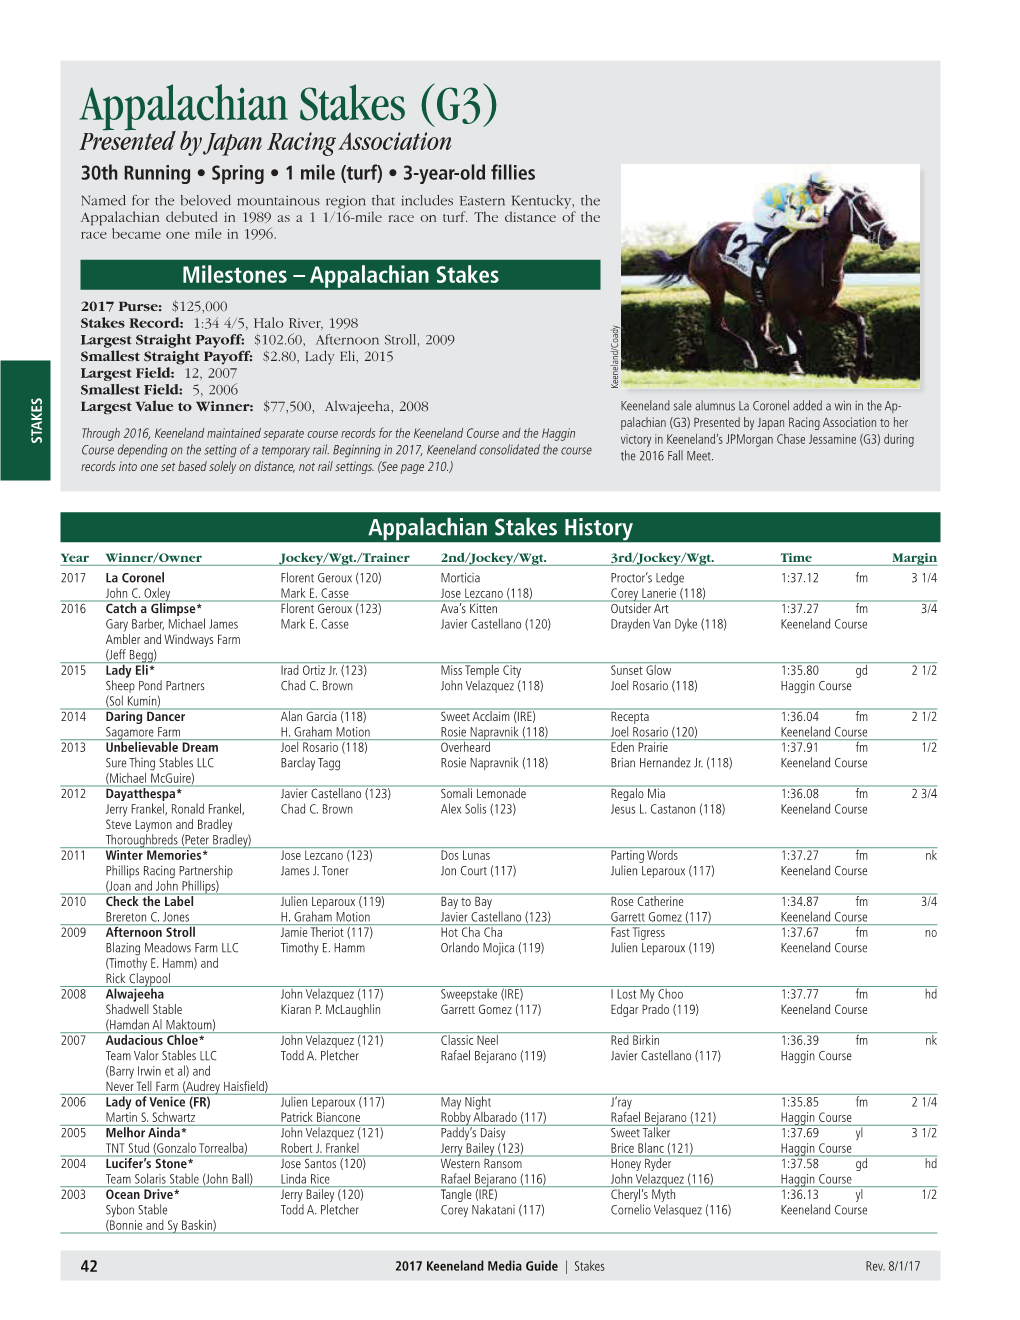 Appalachian Stakes(G3) Course Depending on the Setting of a Temporary Rail